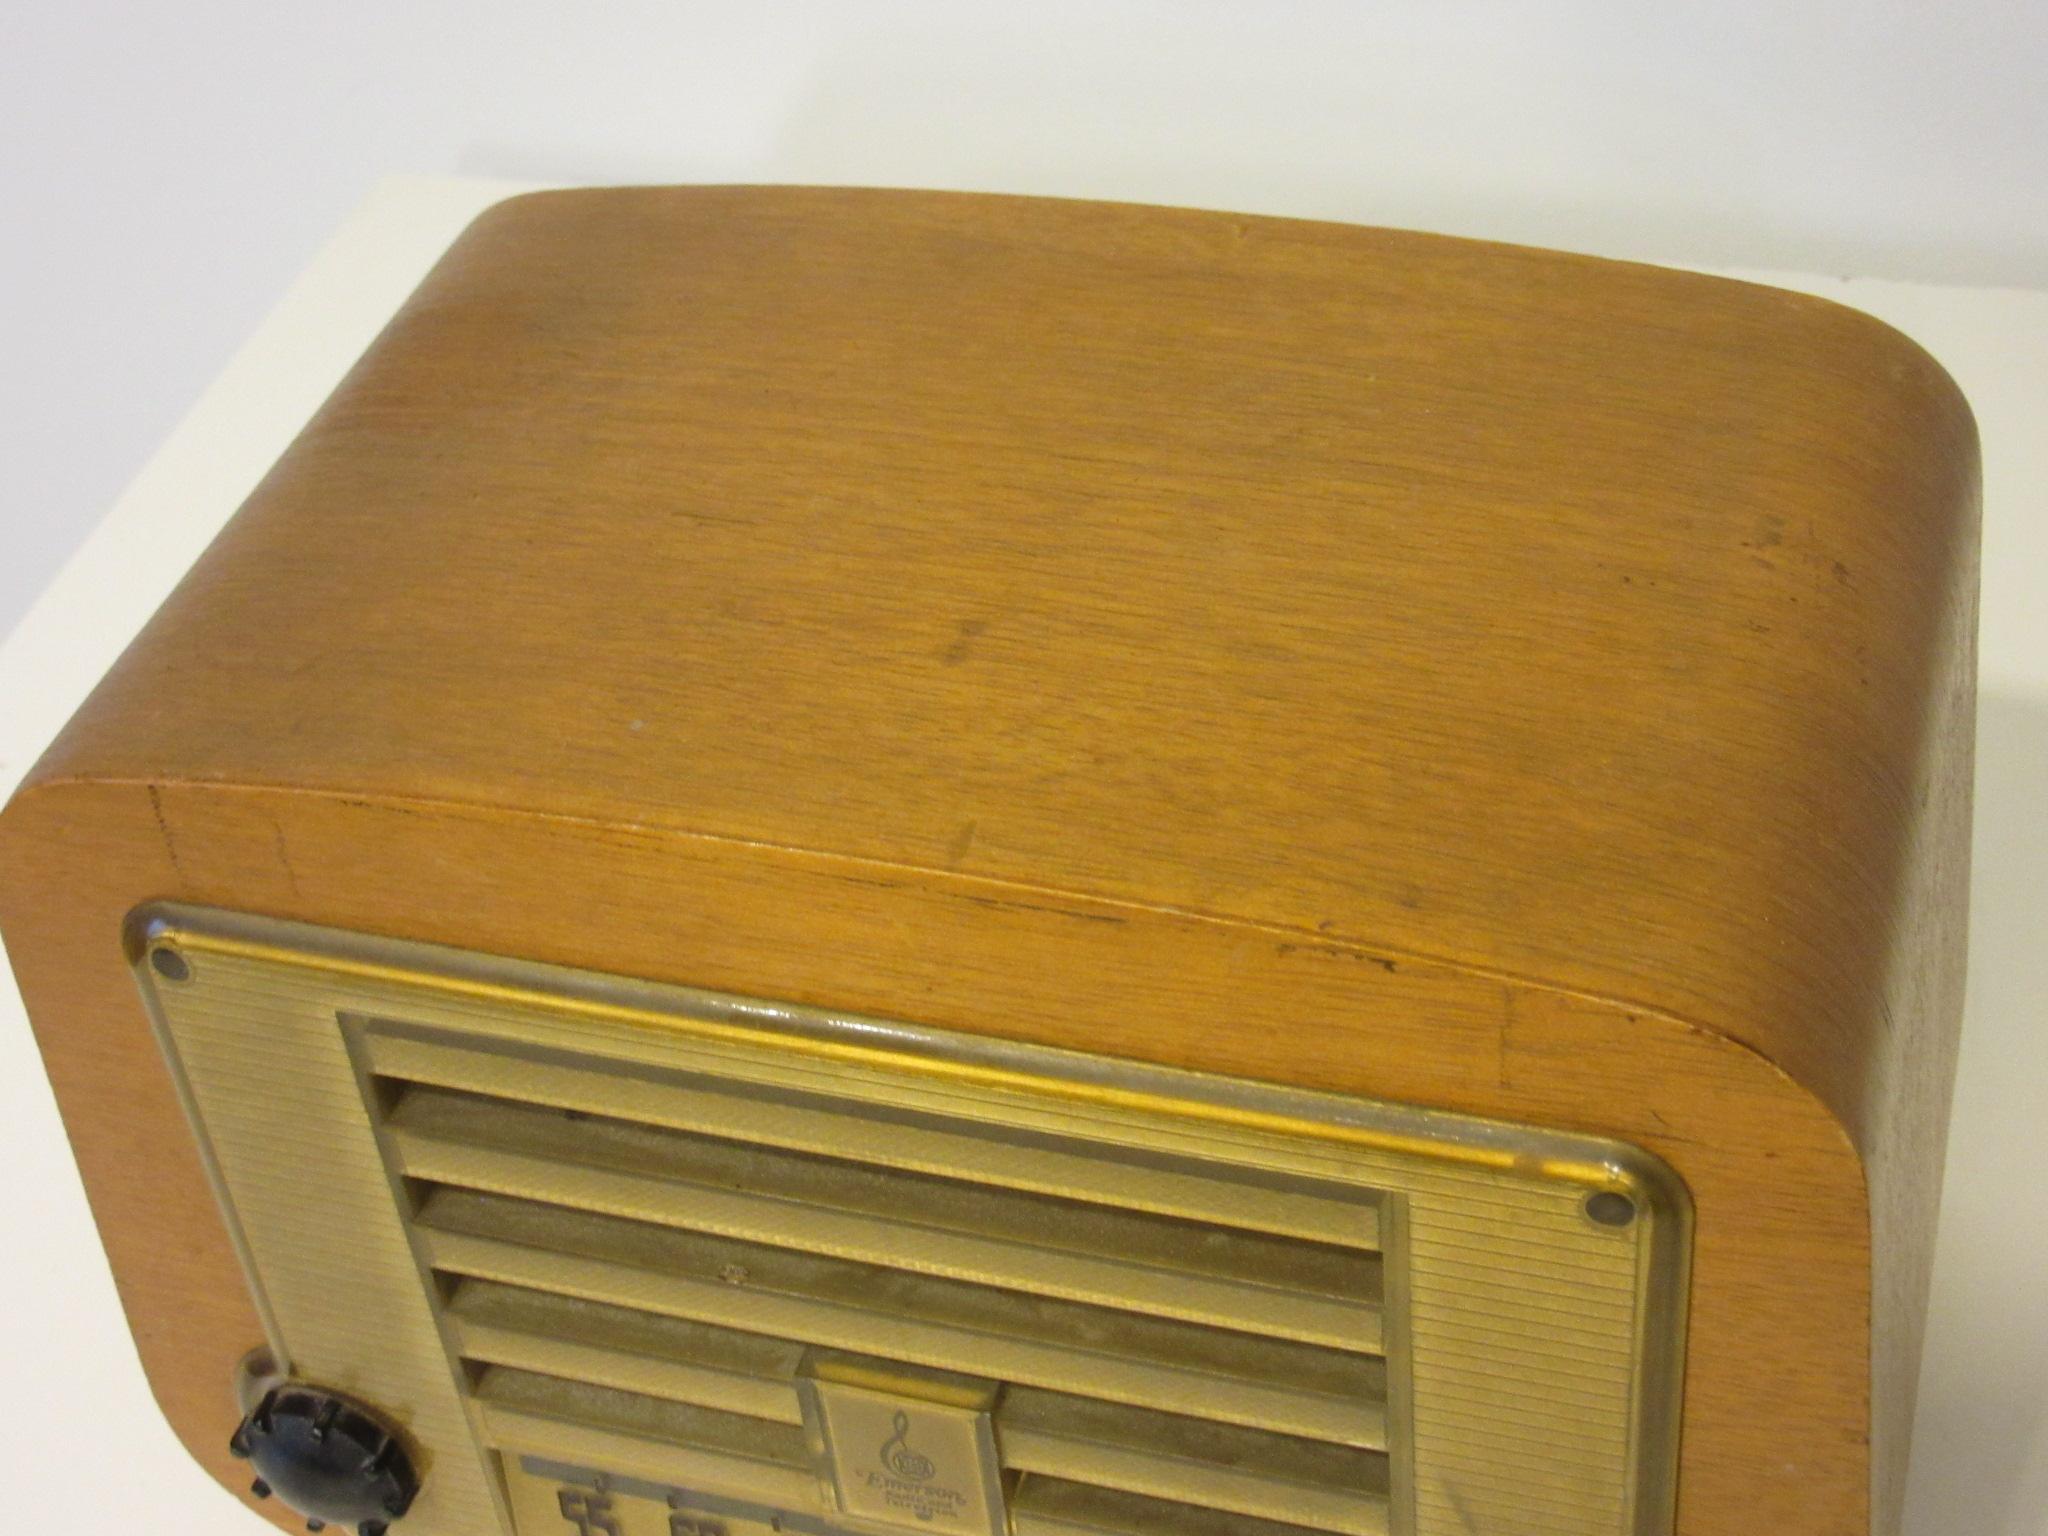 American Eames Designed Emerson Radio by Evans Products